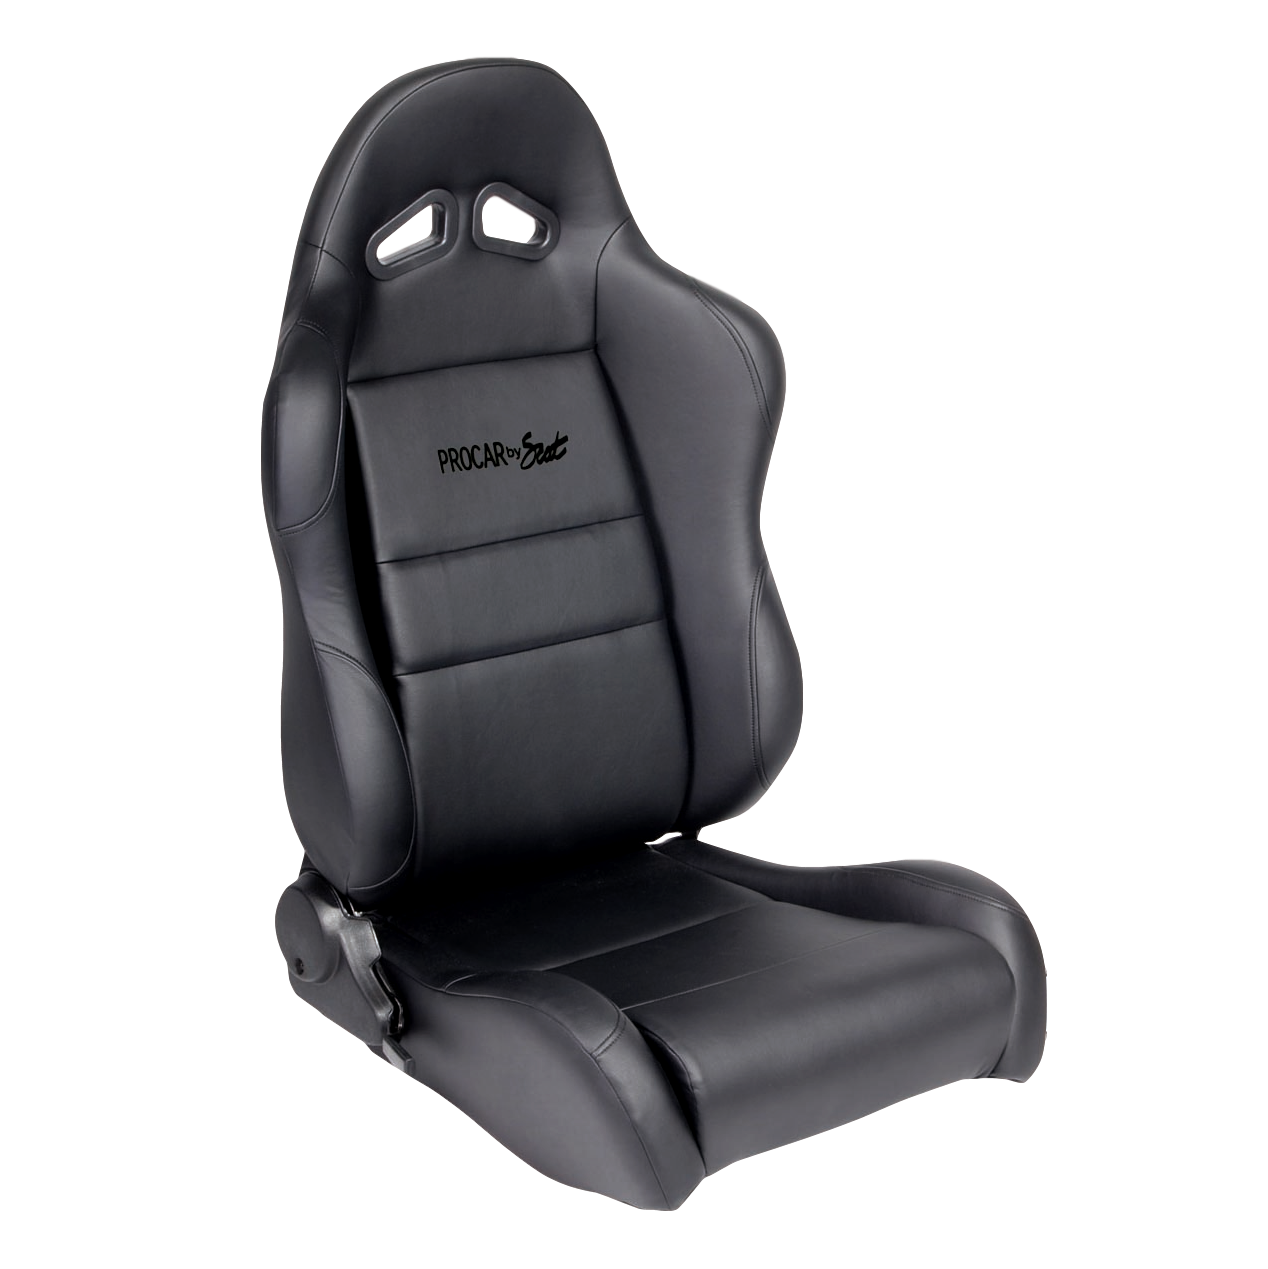 ProCar by Scat 80-1000-51LS Black Vinyl Racing Rally Smooth Back Recliner Left Seat 